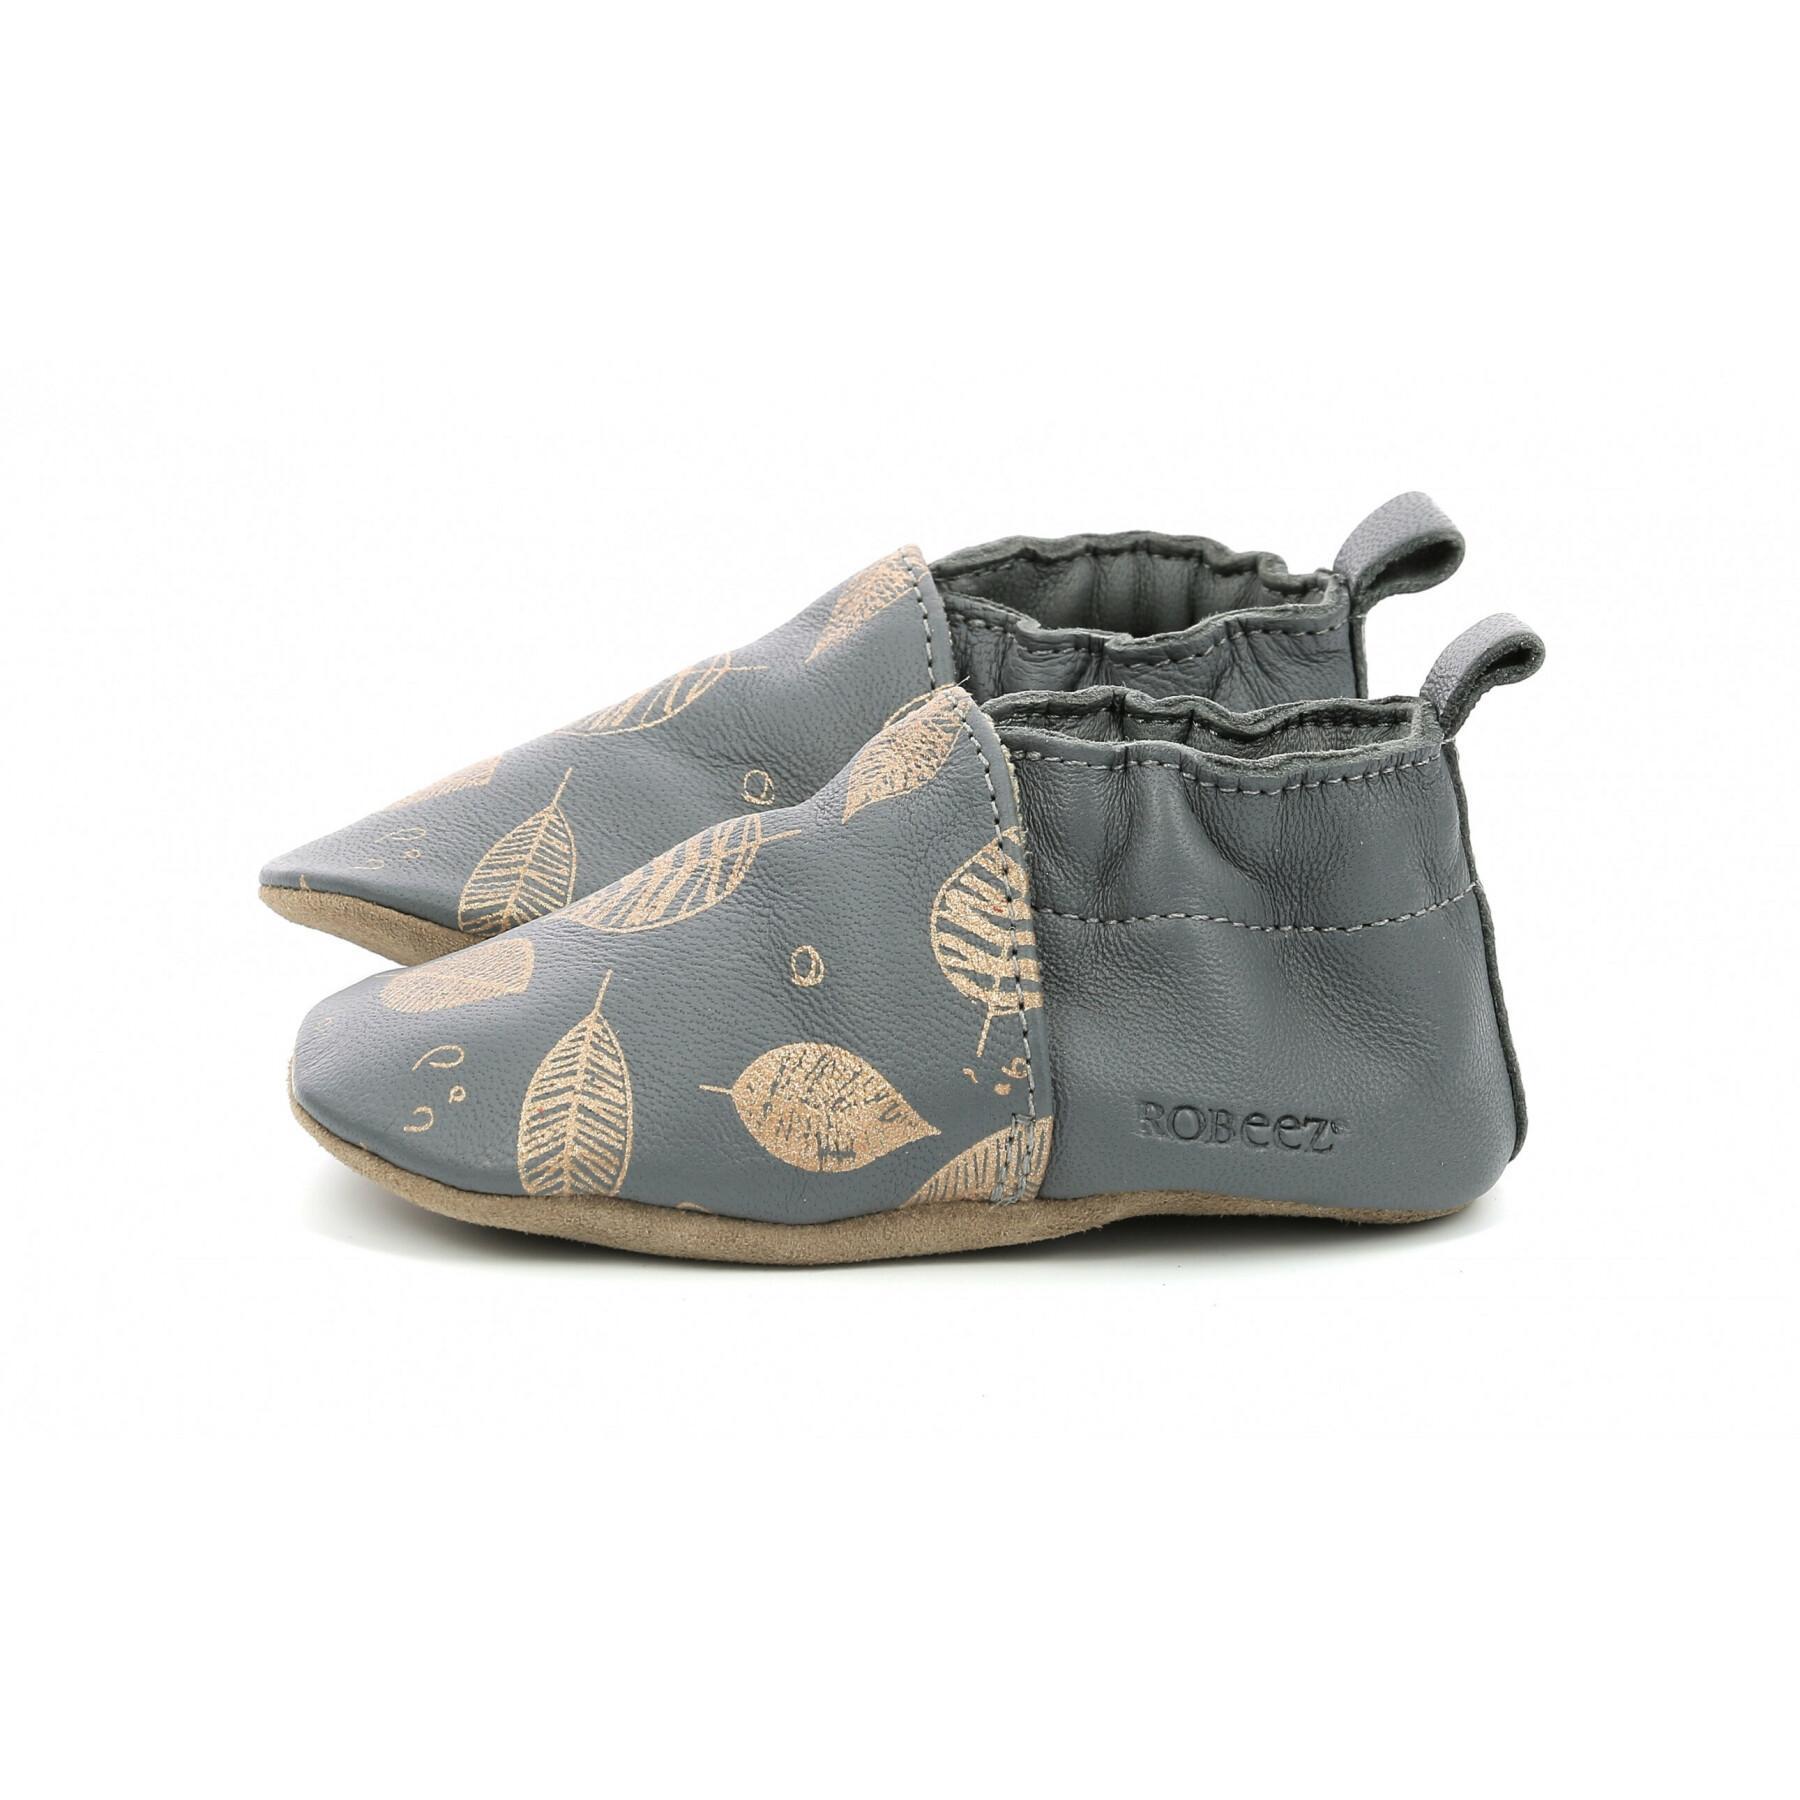 Chaussons fille Robeez Automn Leaves